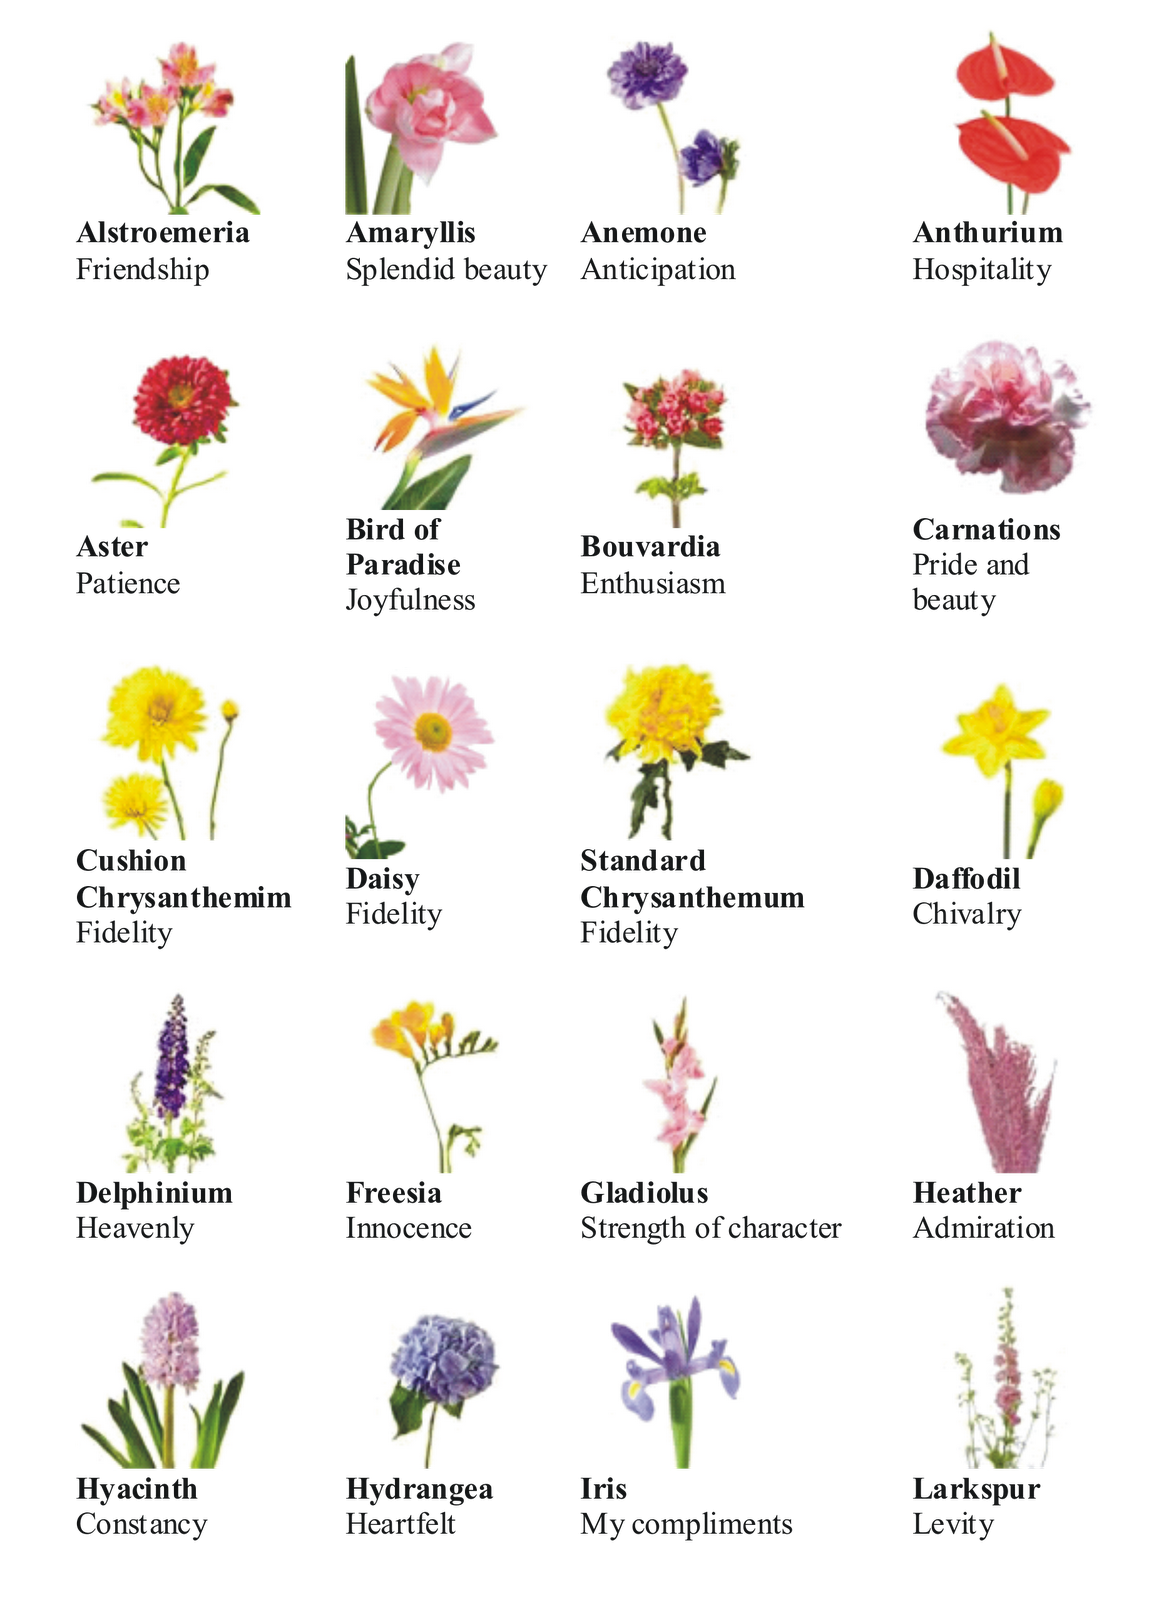 Beautiful Flower Pictures and Name List of Flowers